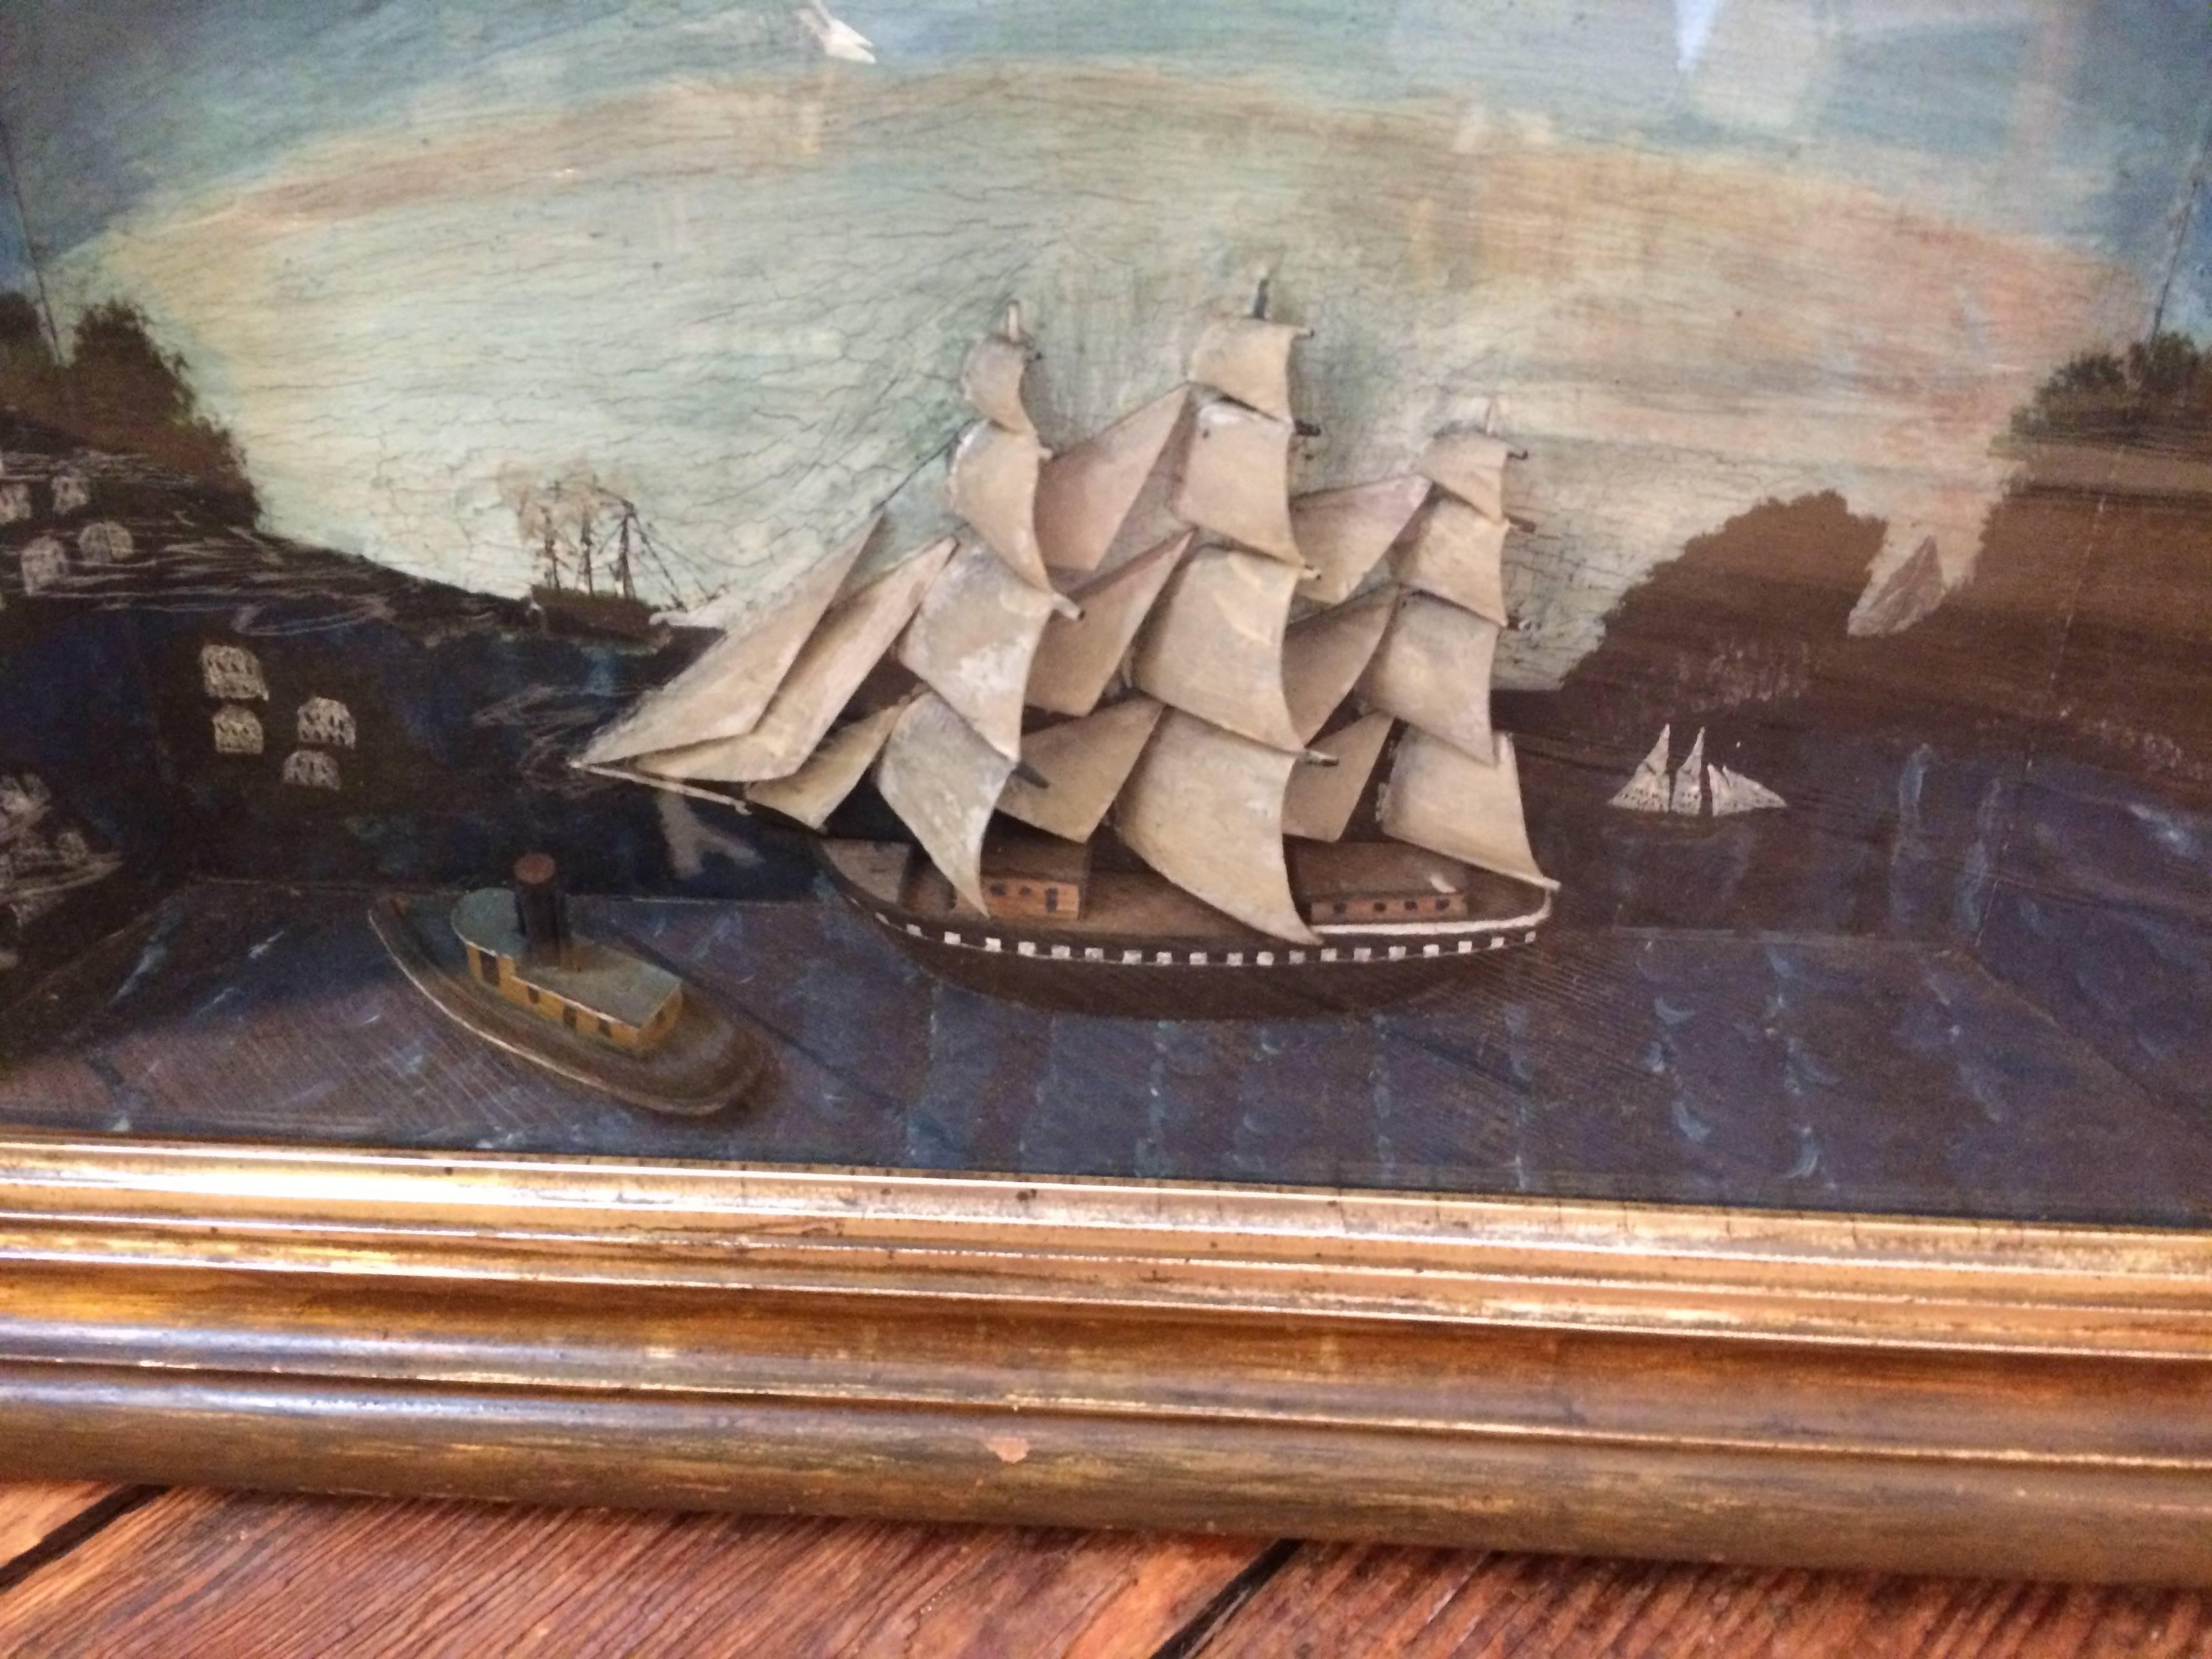 Incredibly crafted handmade antique diorama of a sailing vessel, very 3 D with other boats in the foreground and a graveyard and other details painted in the background. Original old glass with some minor bubbles, and original wooden box frame